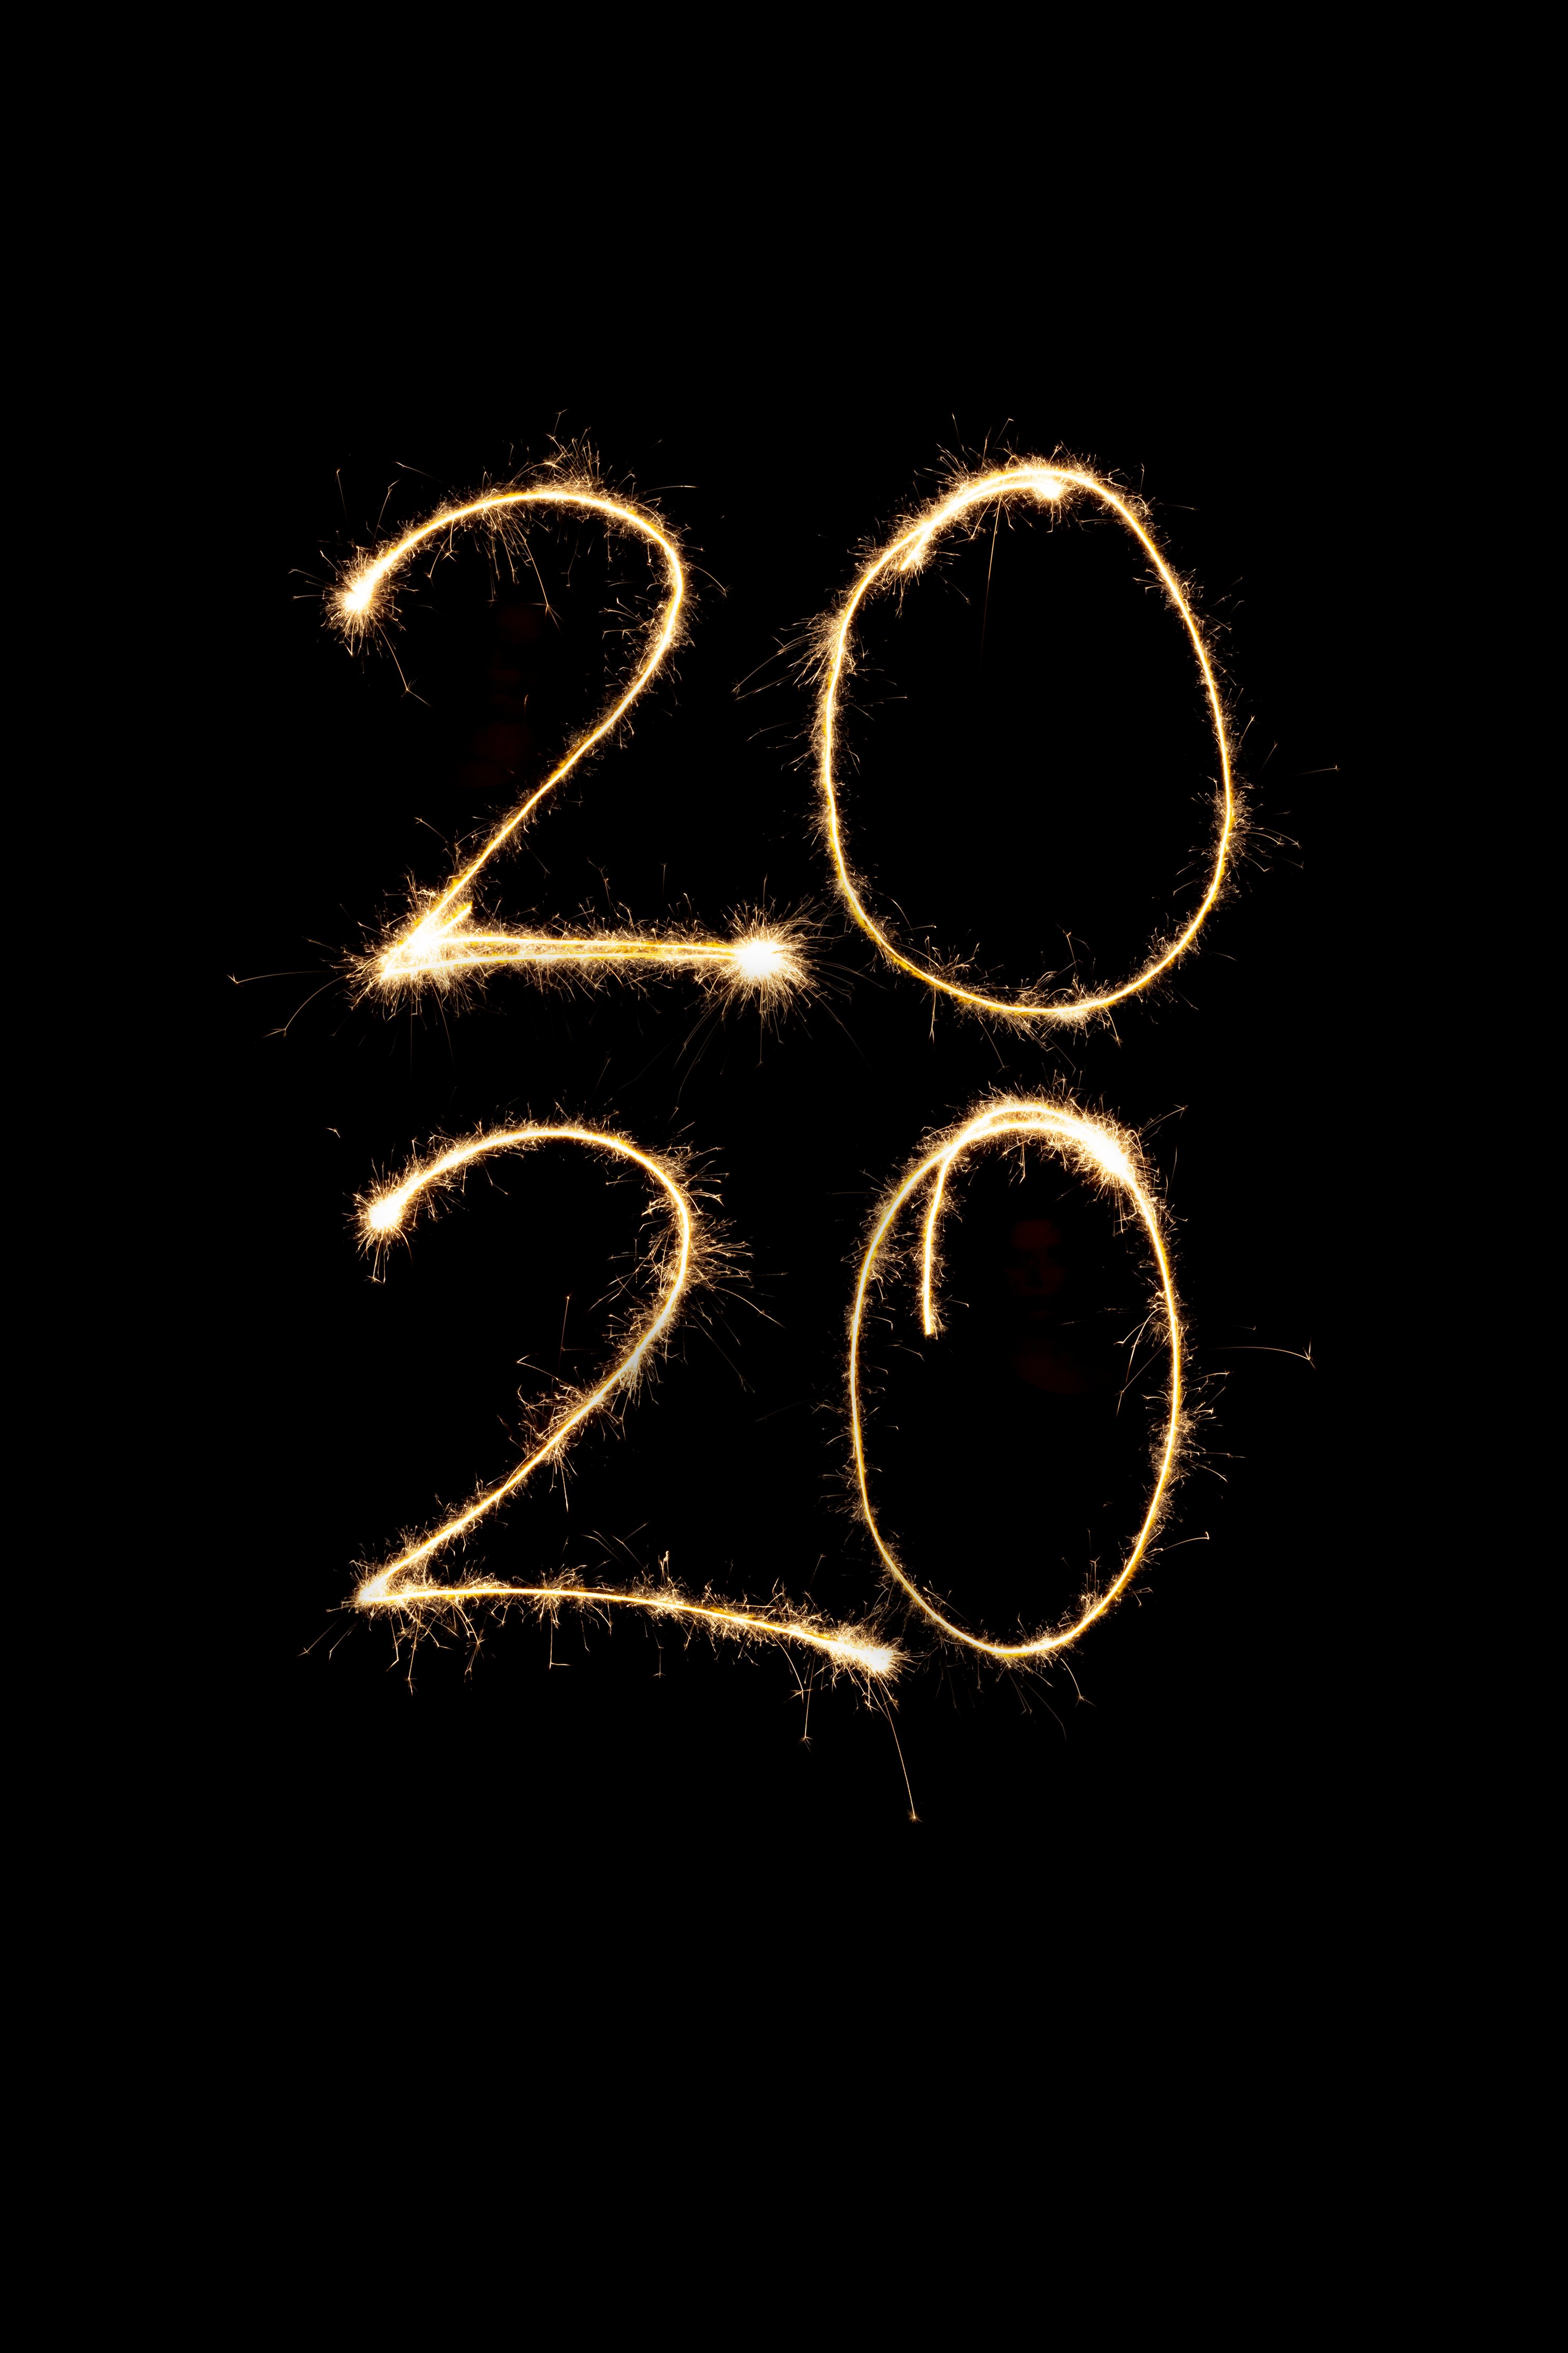 20 ways 2020 improved the way I see things